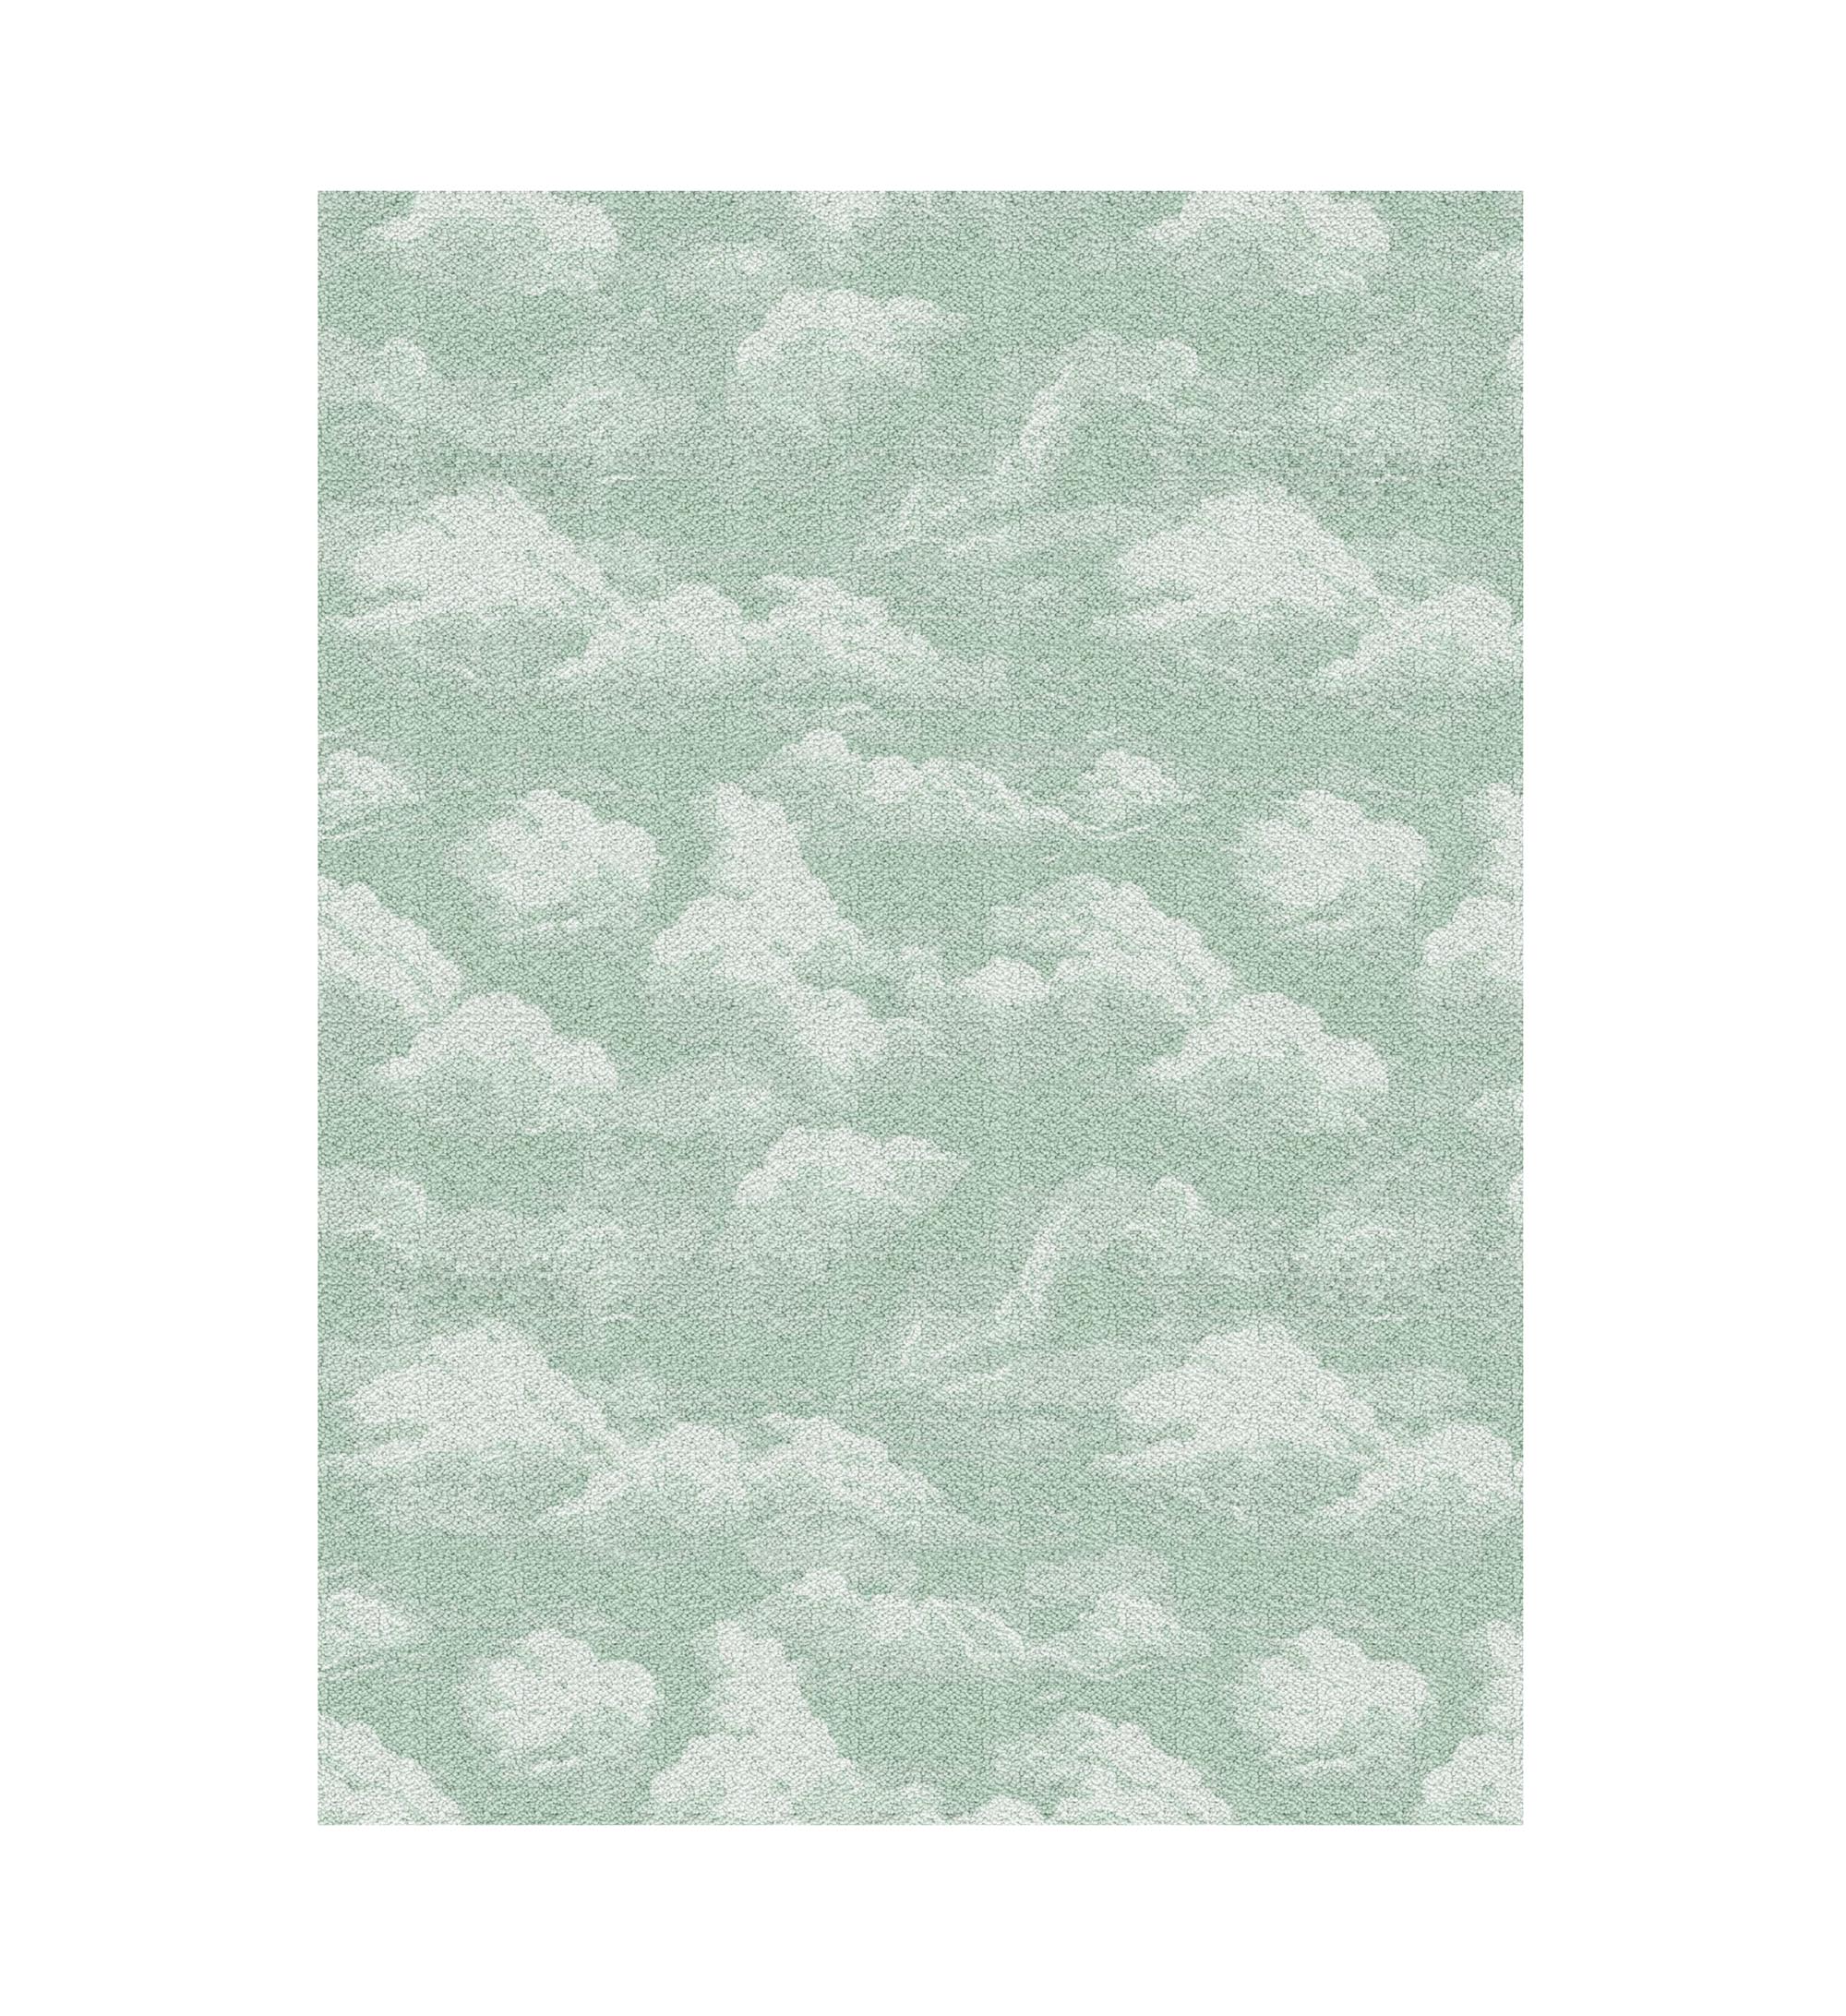 Cumulus Cloud Hand-Knotted Tibetan Weave Wool Area Rug by Kevin Francis Design | Atlanta Interior Designer | Luxury Home Decor